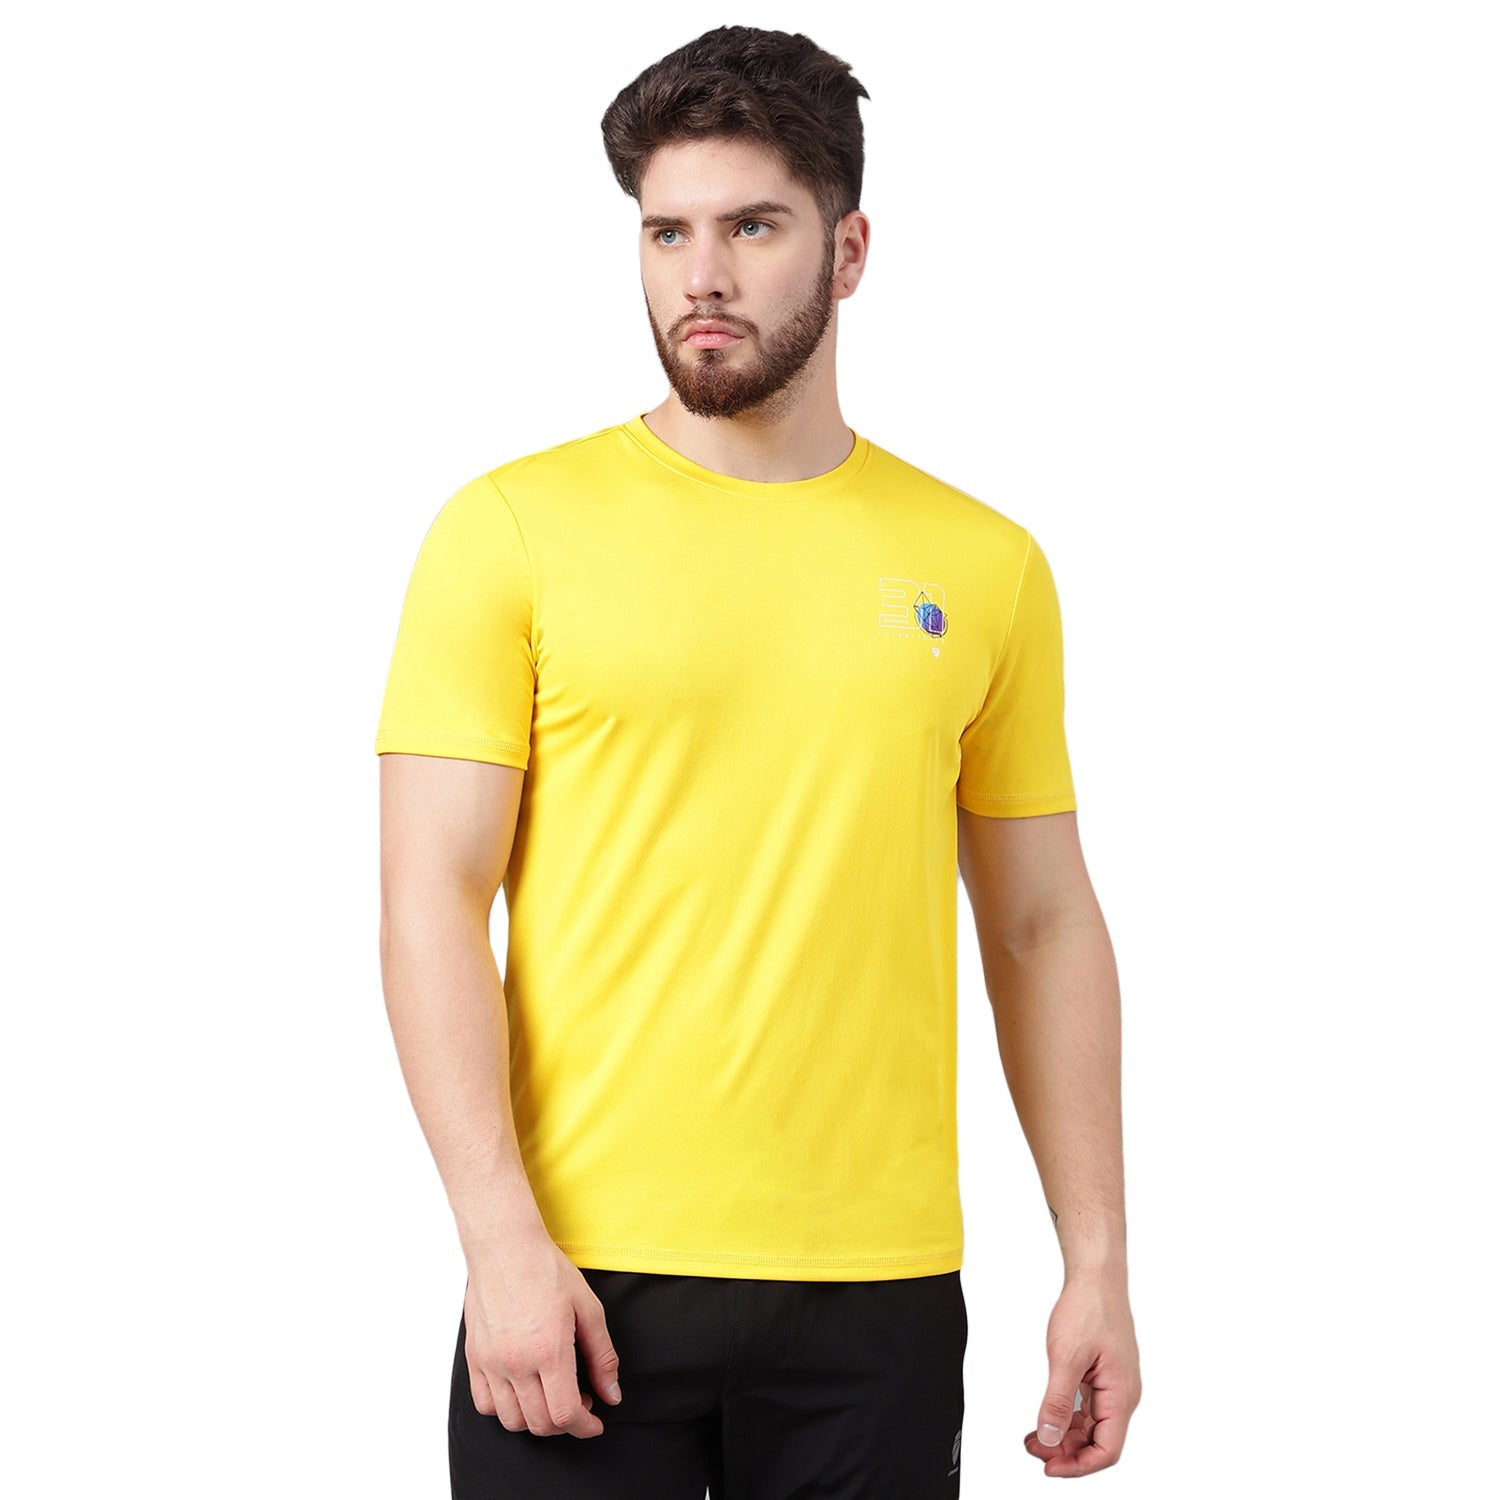 SG UNPAR By SG Mens Round Neck Autumn-Glory Tee | Ideal for Trail Running, Fitness & Training, Jogging, Regular & Fashion Wear